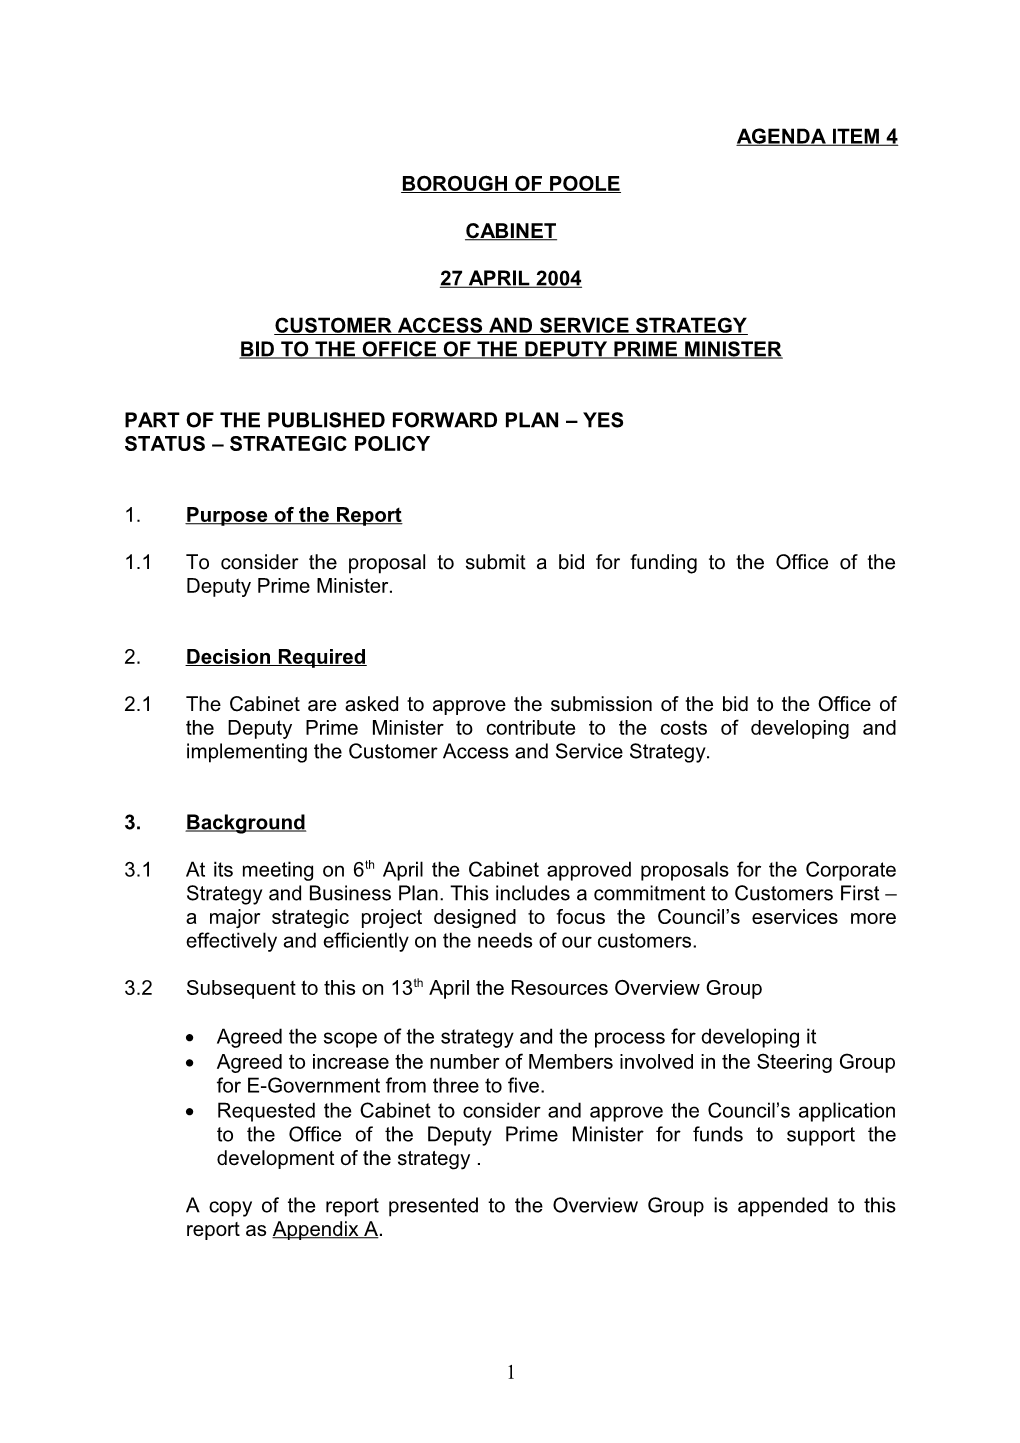 Customer Access and Service Strategy Bid to the Office of the Deputy Prime Minister - 27Th